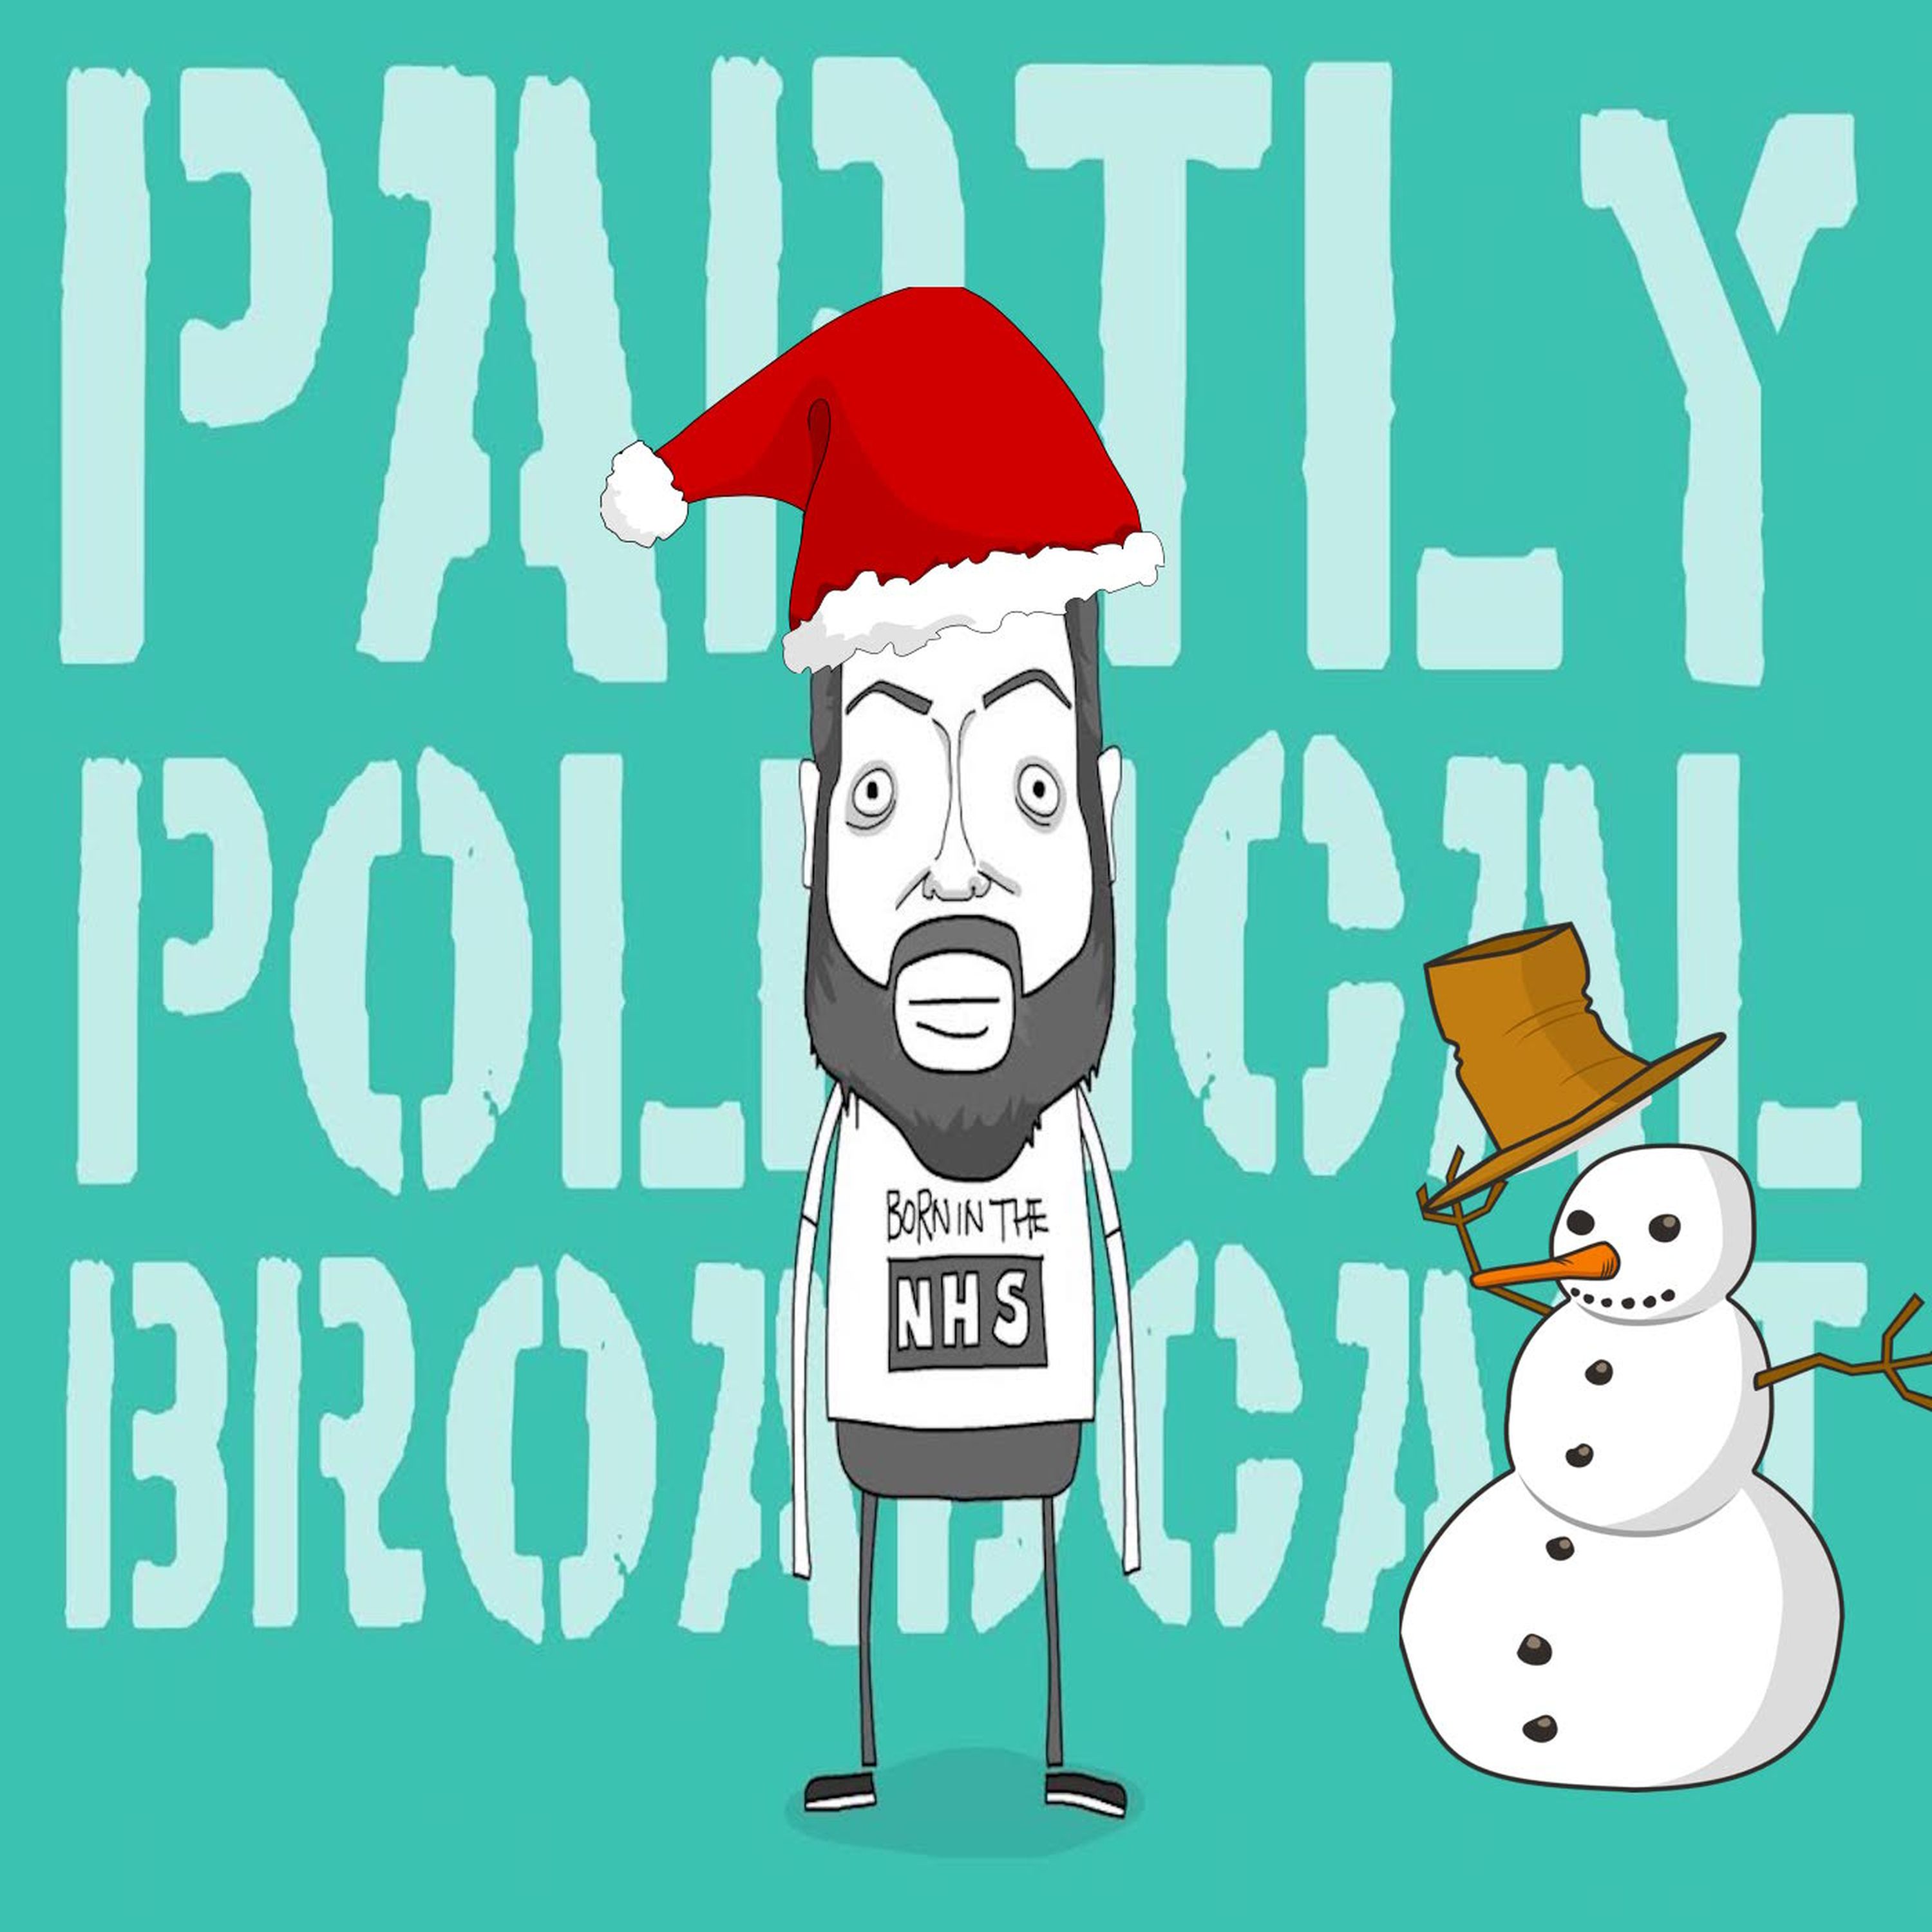 Episode 125 - Eggnog In Spain - No Confidence In Anything Especially Theresa May, Tatton Spiller from Simple Politics, Workplace Reform, ITS CHRISTMAS